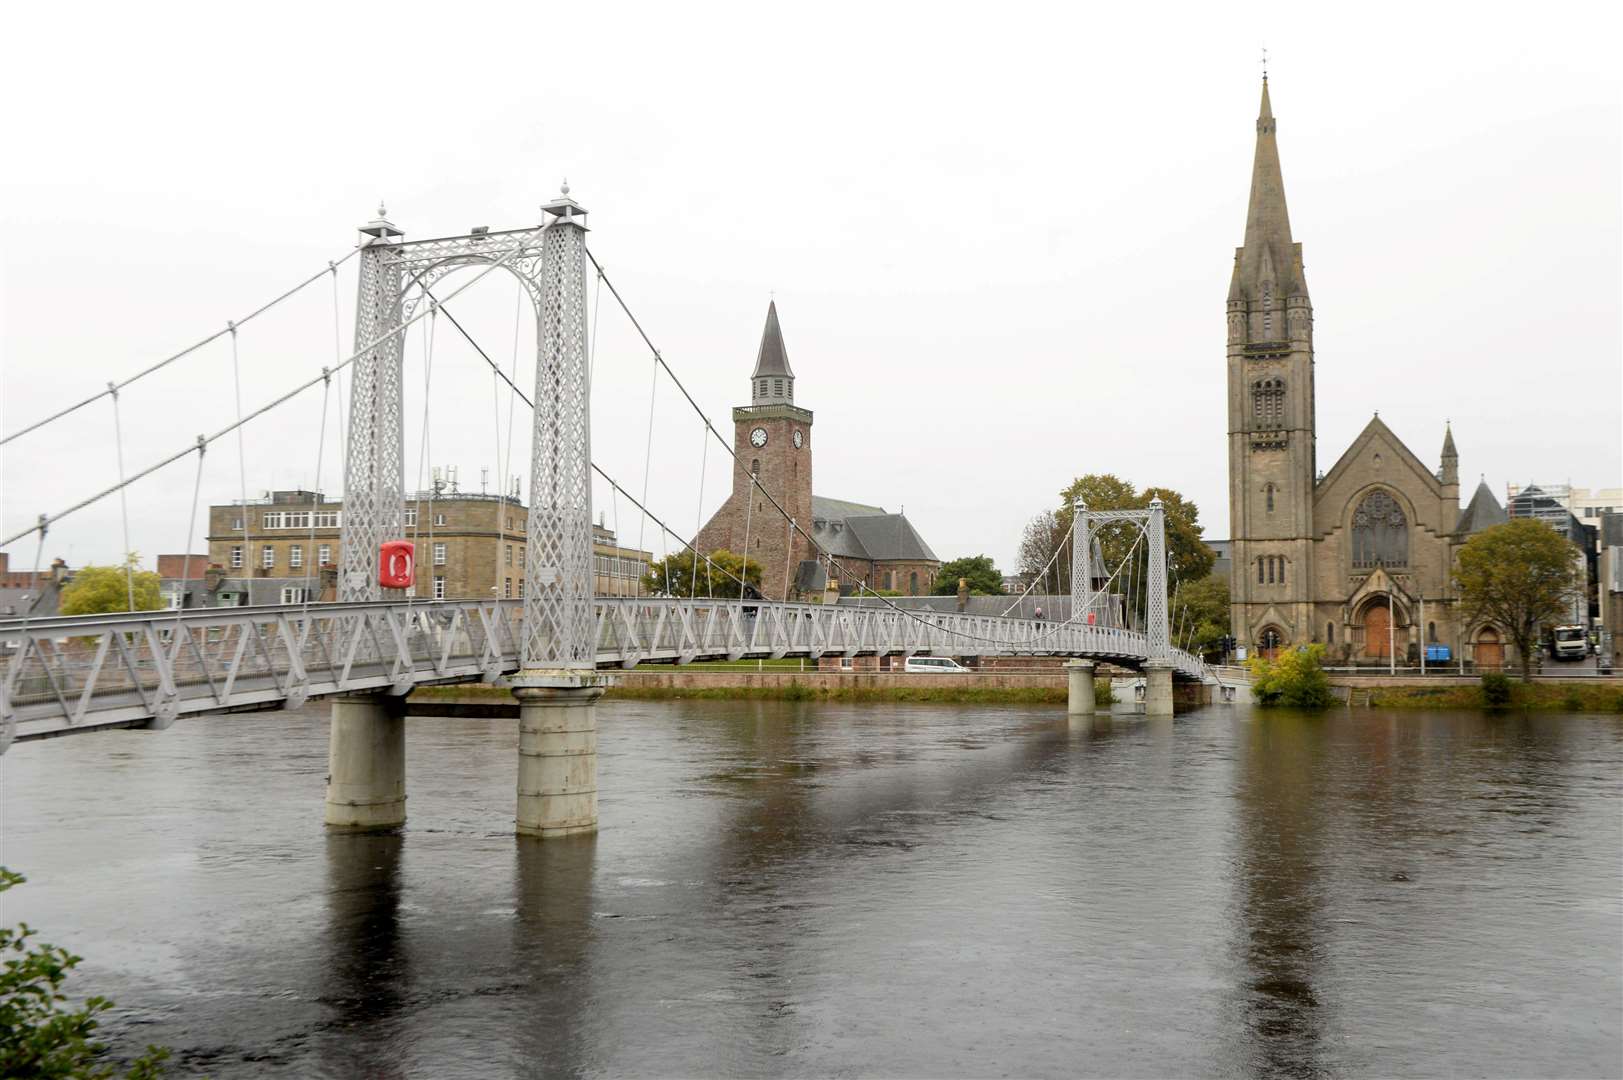 Greig Street Bridge in Inverness is among the places highlighted in a guide to Inverness by Grace Nicoll.